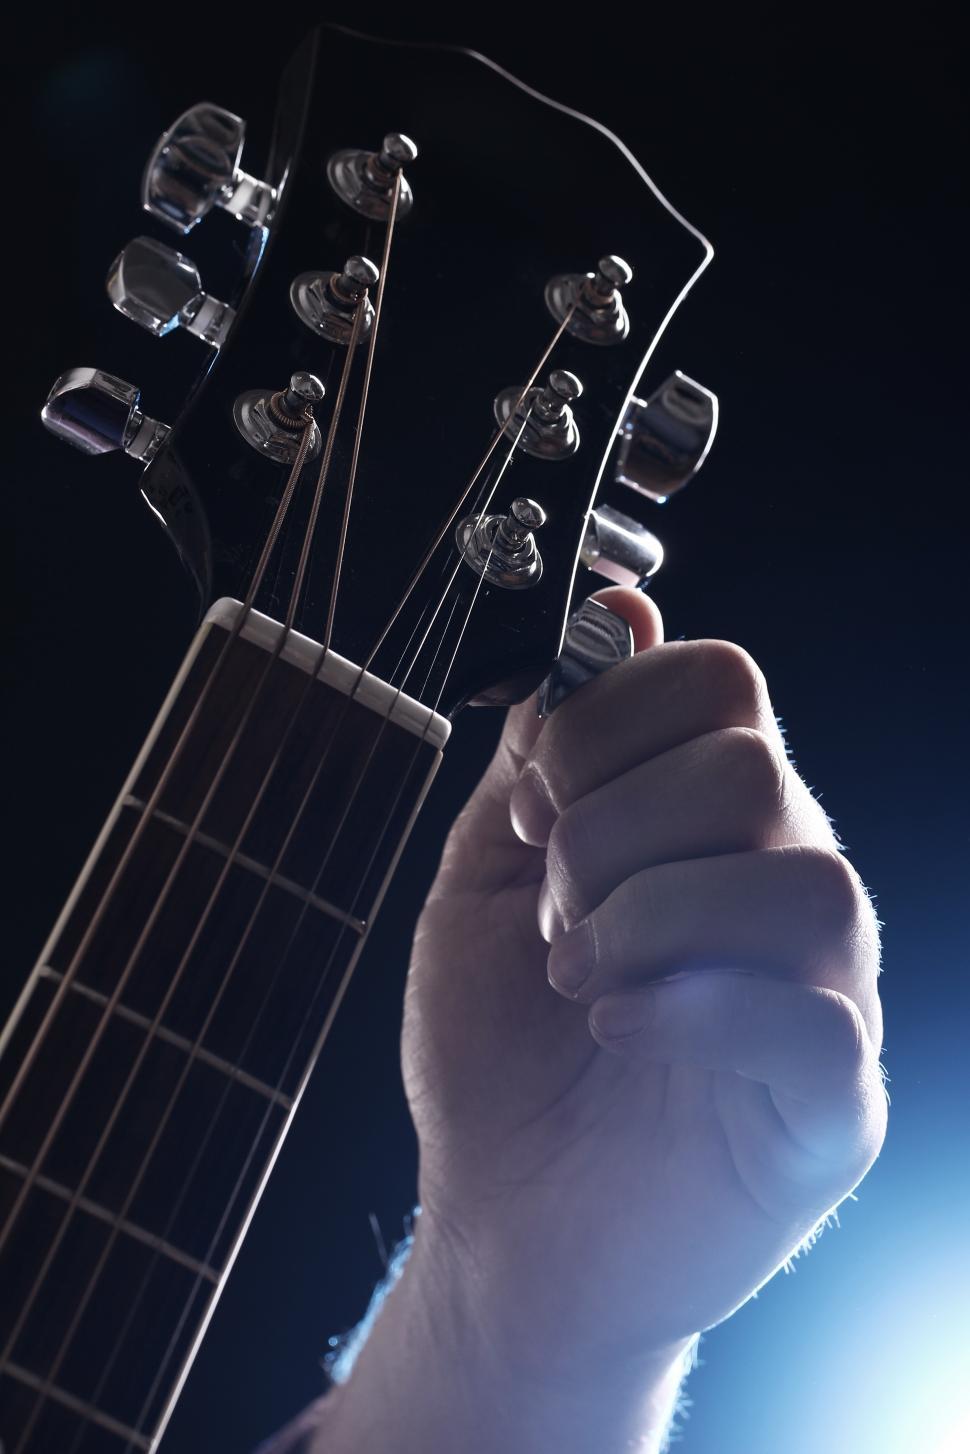 Free Image of Musician tuning a guitar under lights 